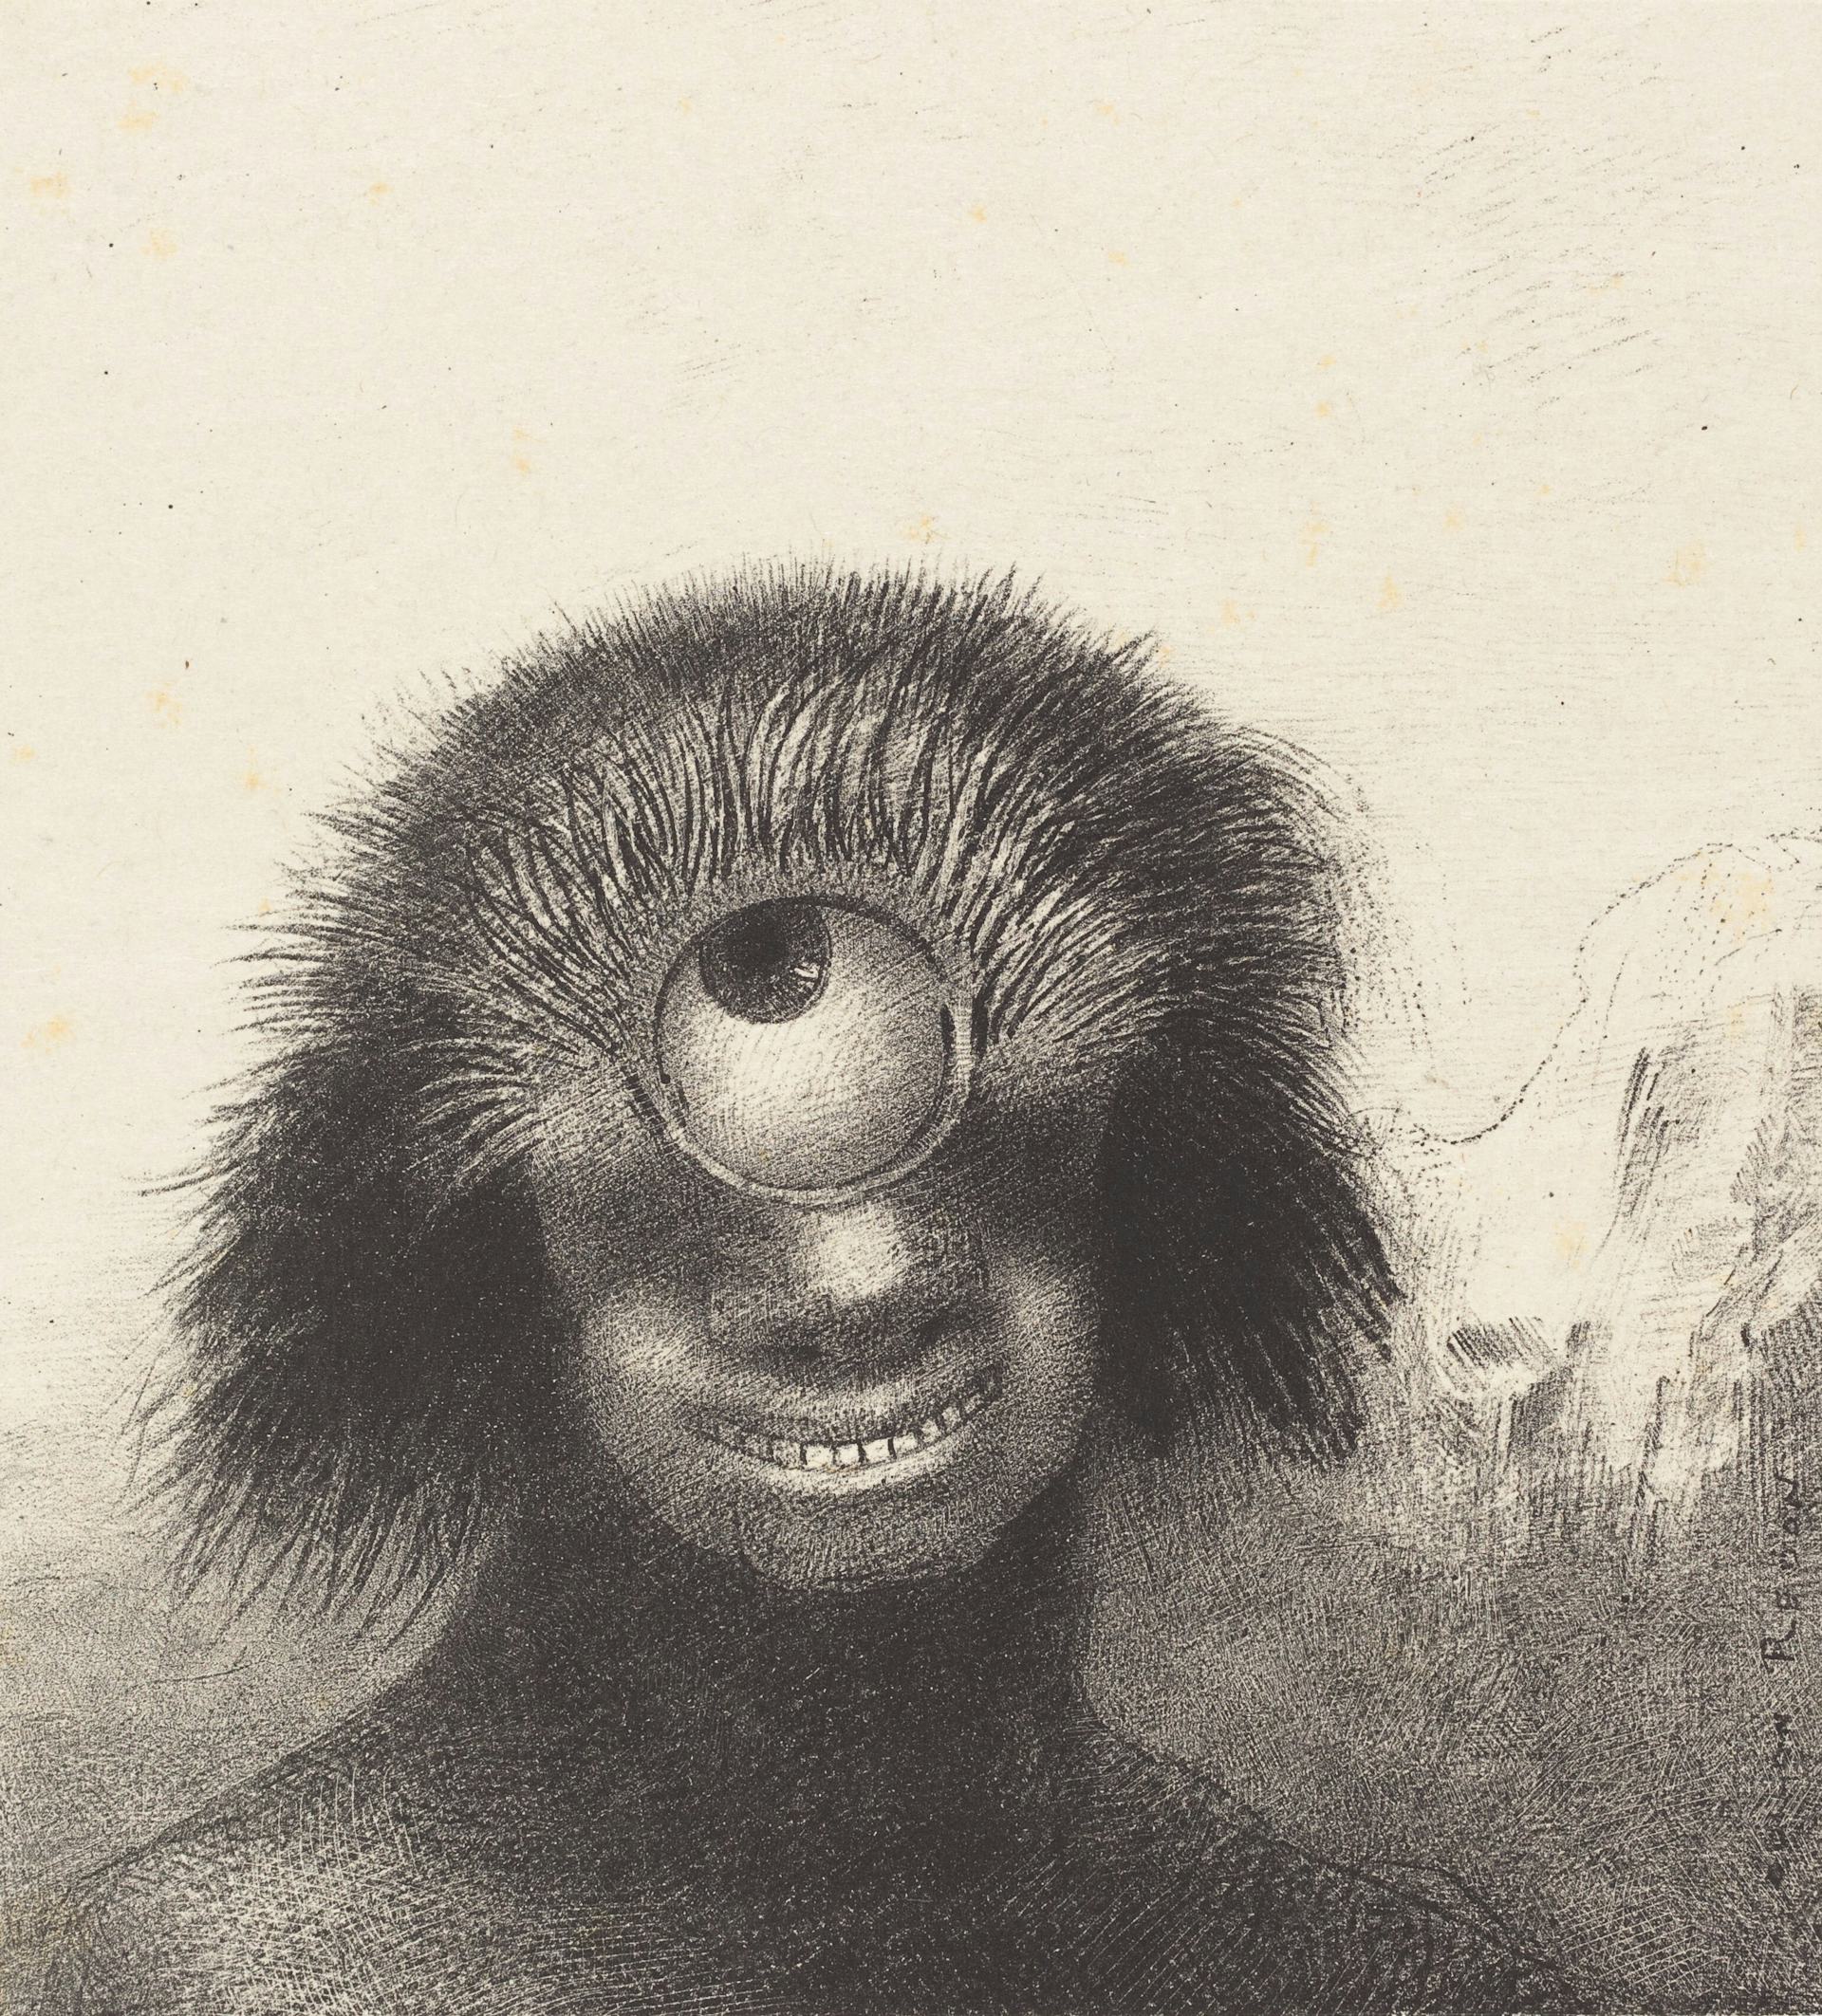 The deformed polyp floated on the shores, a sort of smiling and hideous Cyclops by Odilon Redon (1883)